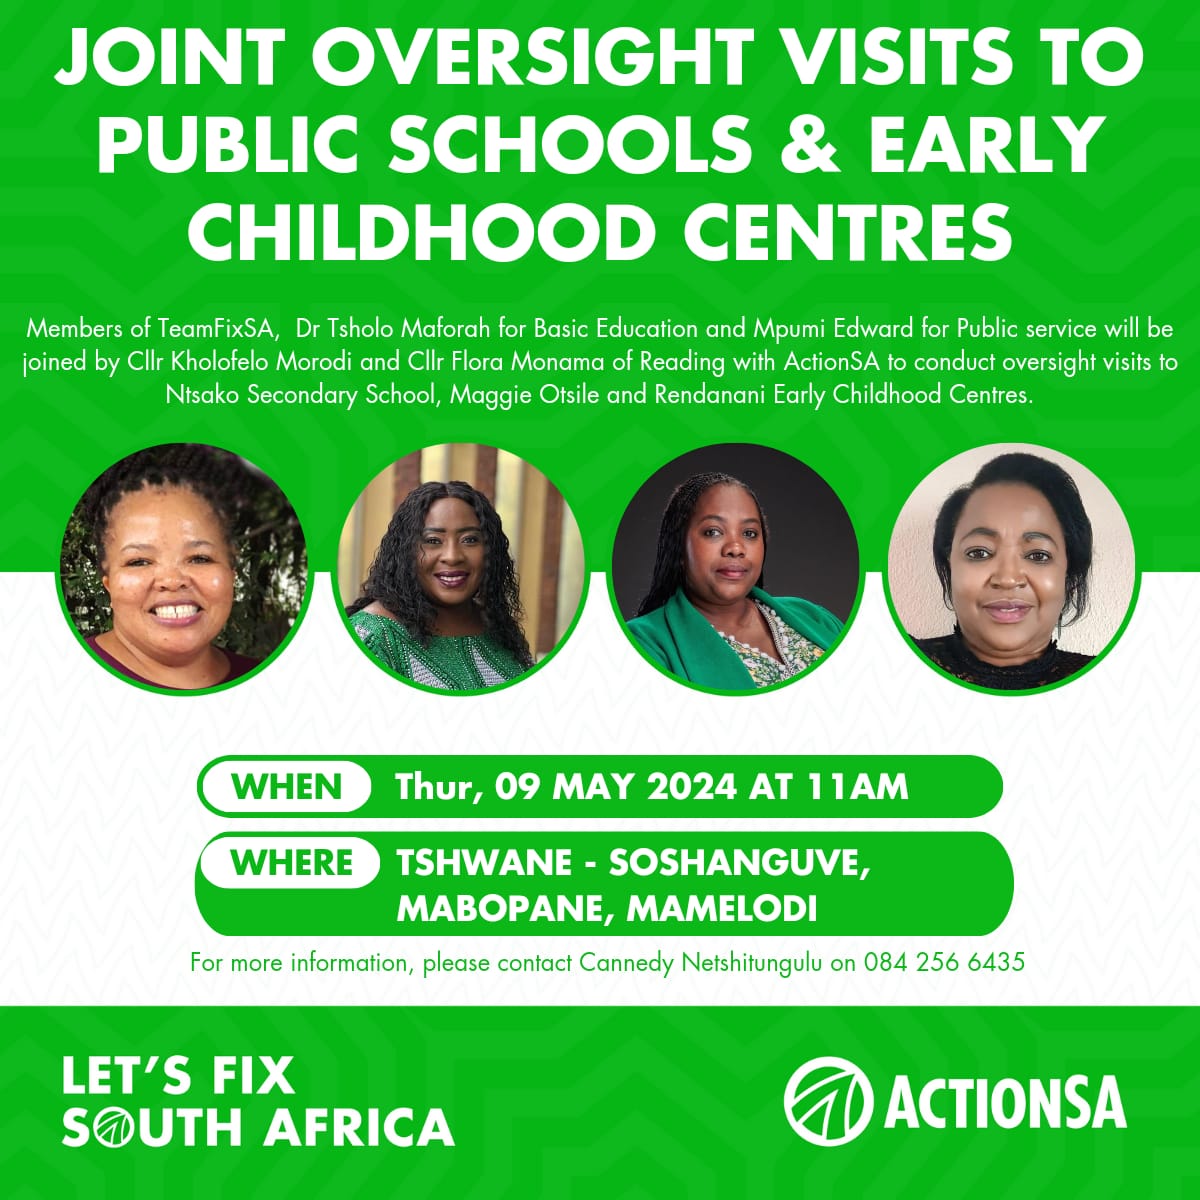 Members of @Action4SA TeamFixSA Dr Tsholo Maforah, myself joined by Cllr Kholofelo Morodi and Cllr Flora Monama to conduct oversight visits to few Early Childhood Centres in Soshanguve. @TuksFM1072